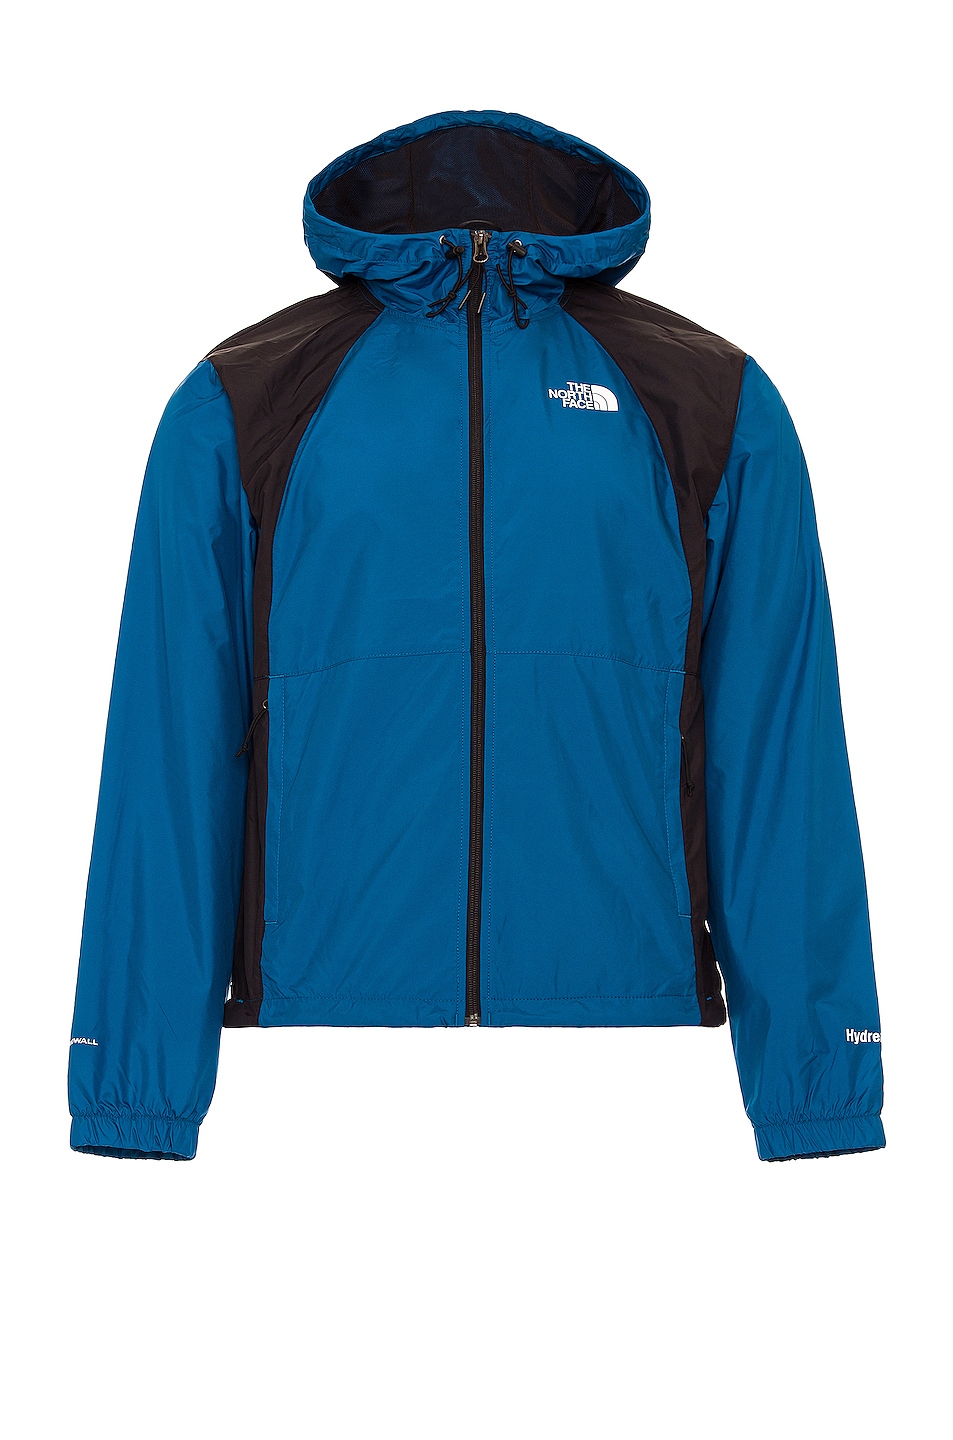 Image 1 of The North Face Hydrenaline Jacket 2000 in Baniff Blue